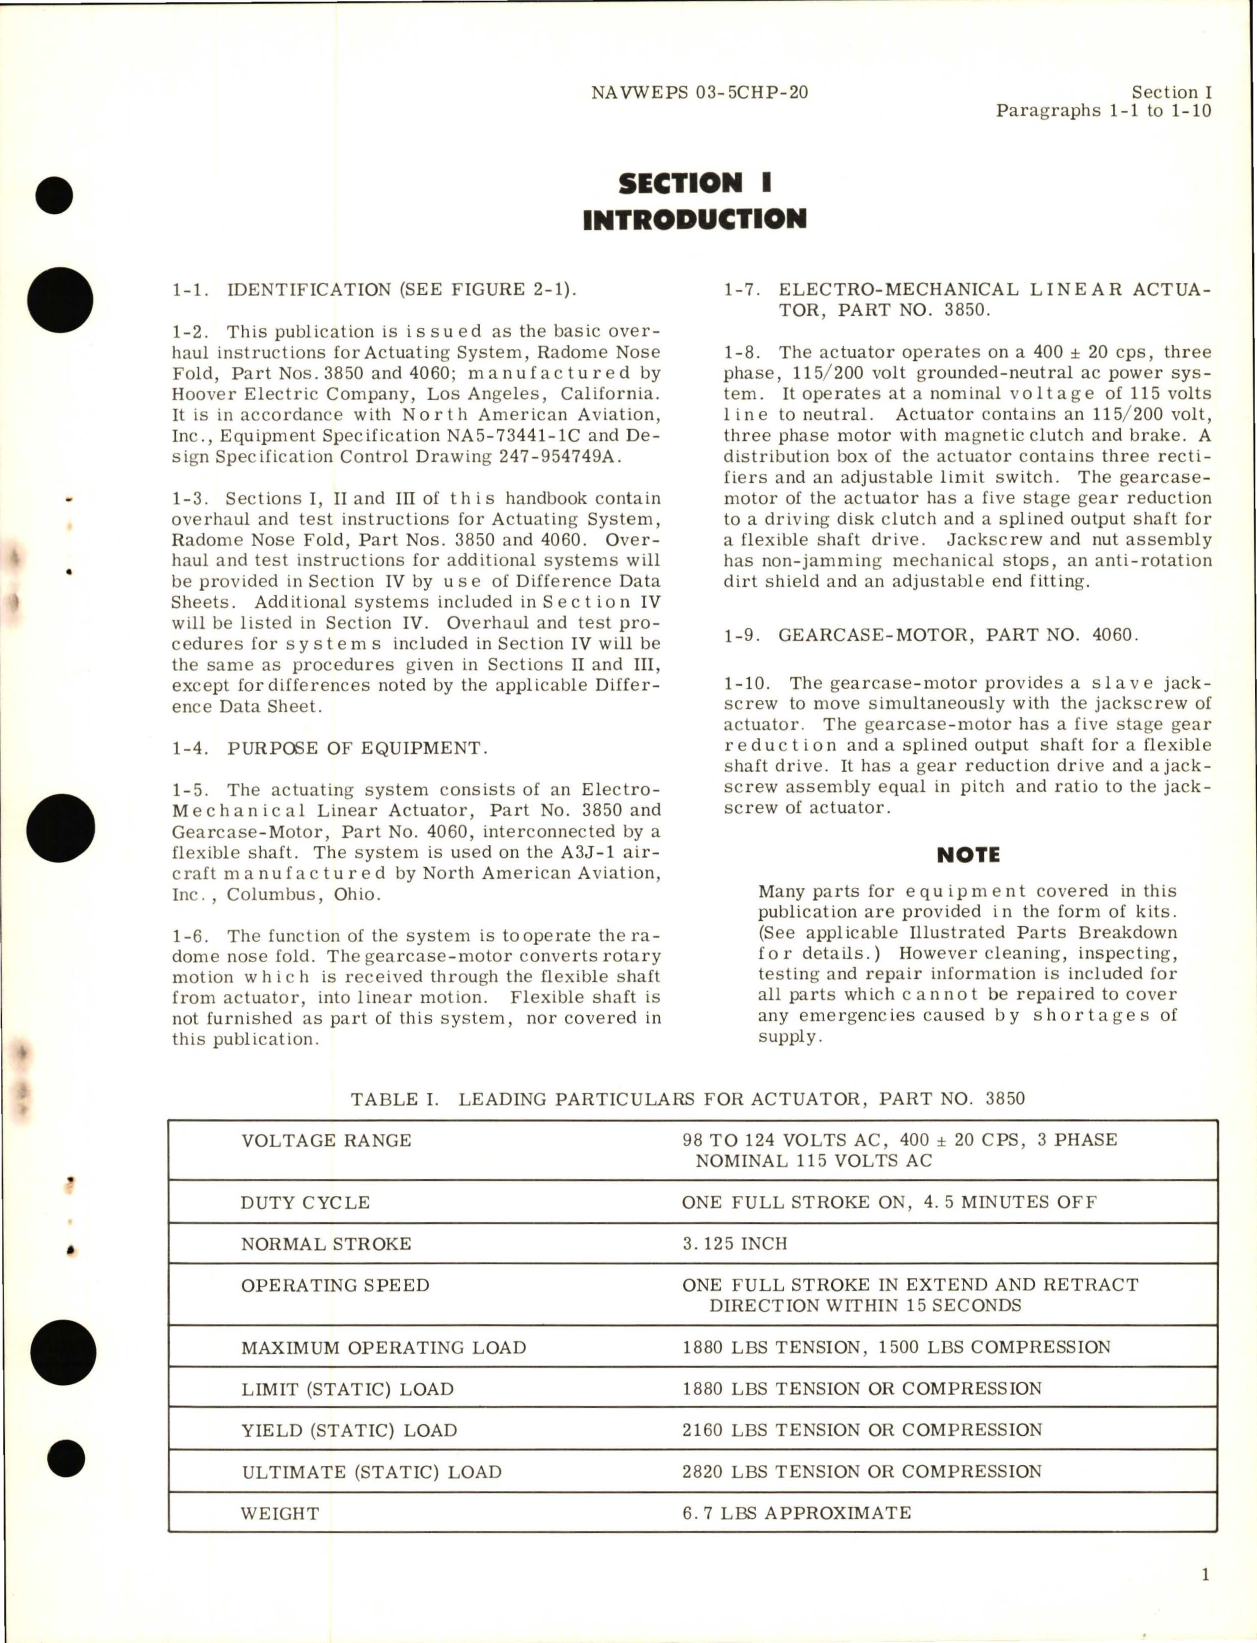 Sample page 5 from AirCorps Library document: Overhaul Instructions for Electro-Mechanical Linear Actuator 3850, 3850-1, 4060, and 4060-1